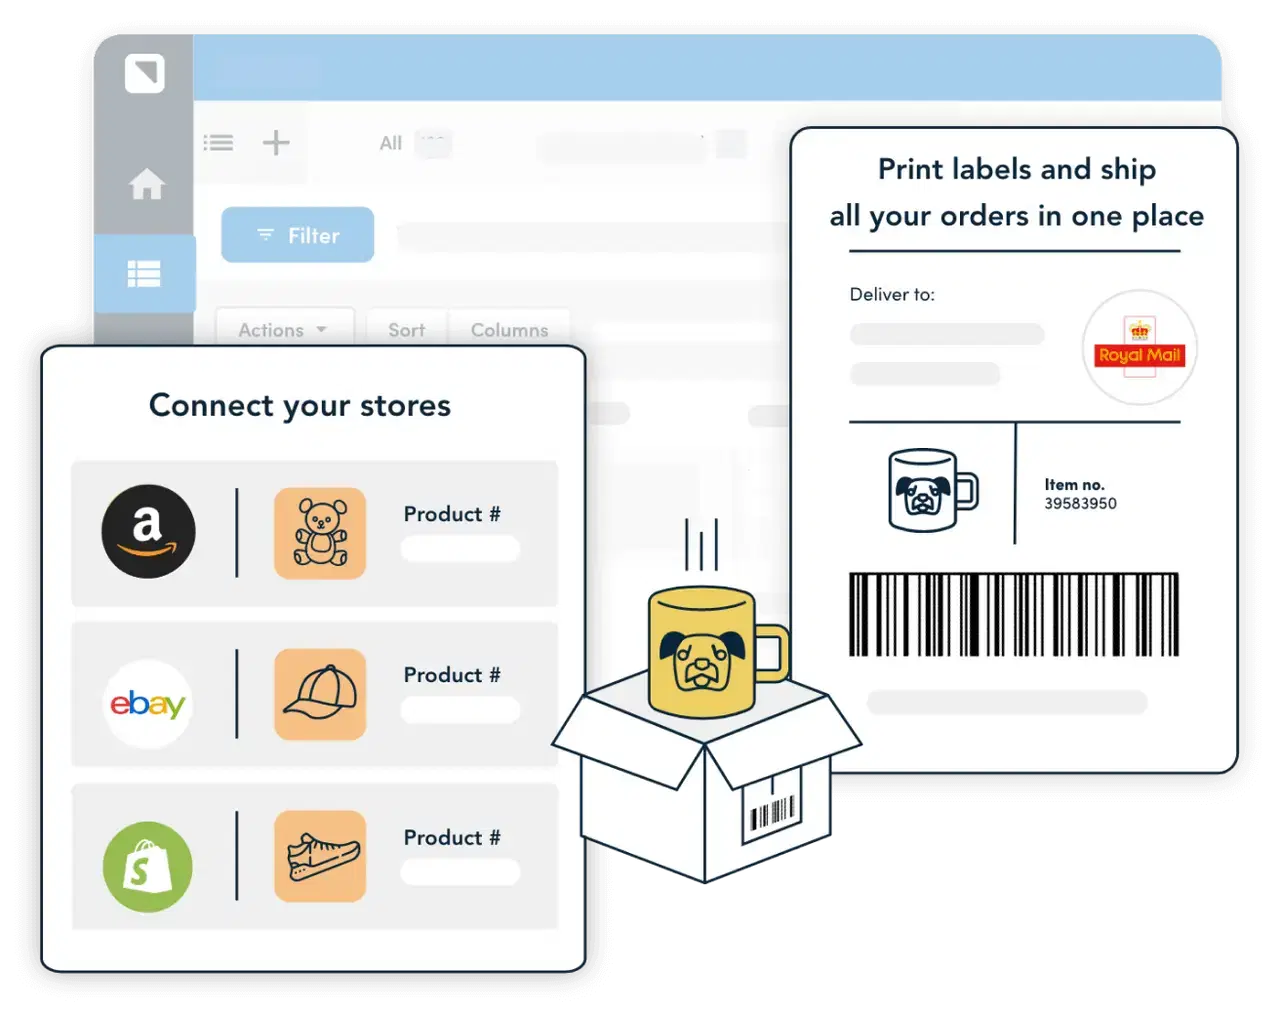 Connect all your stores, shop low rates on all orders and save money on shipping labels.